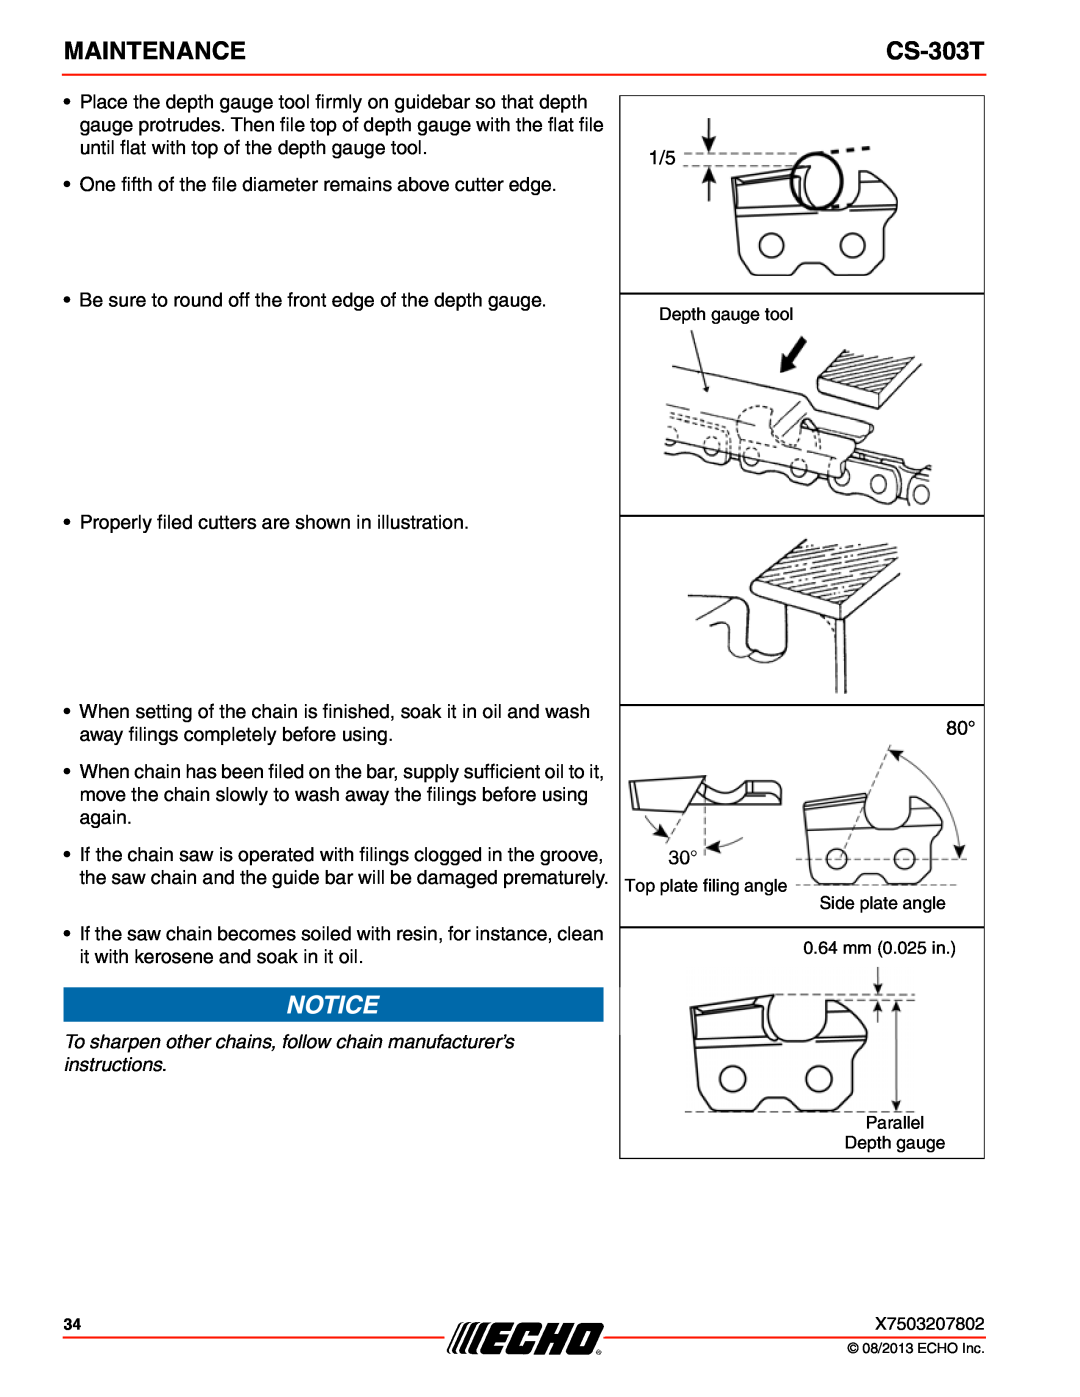 Echo CS-303T instruction manual Maintenance, Properly filed cutters are shown in illustration 